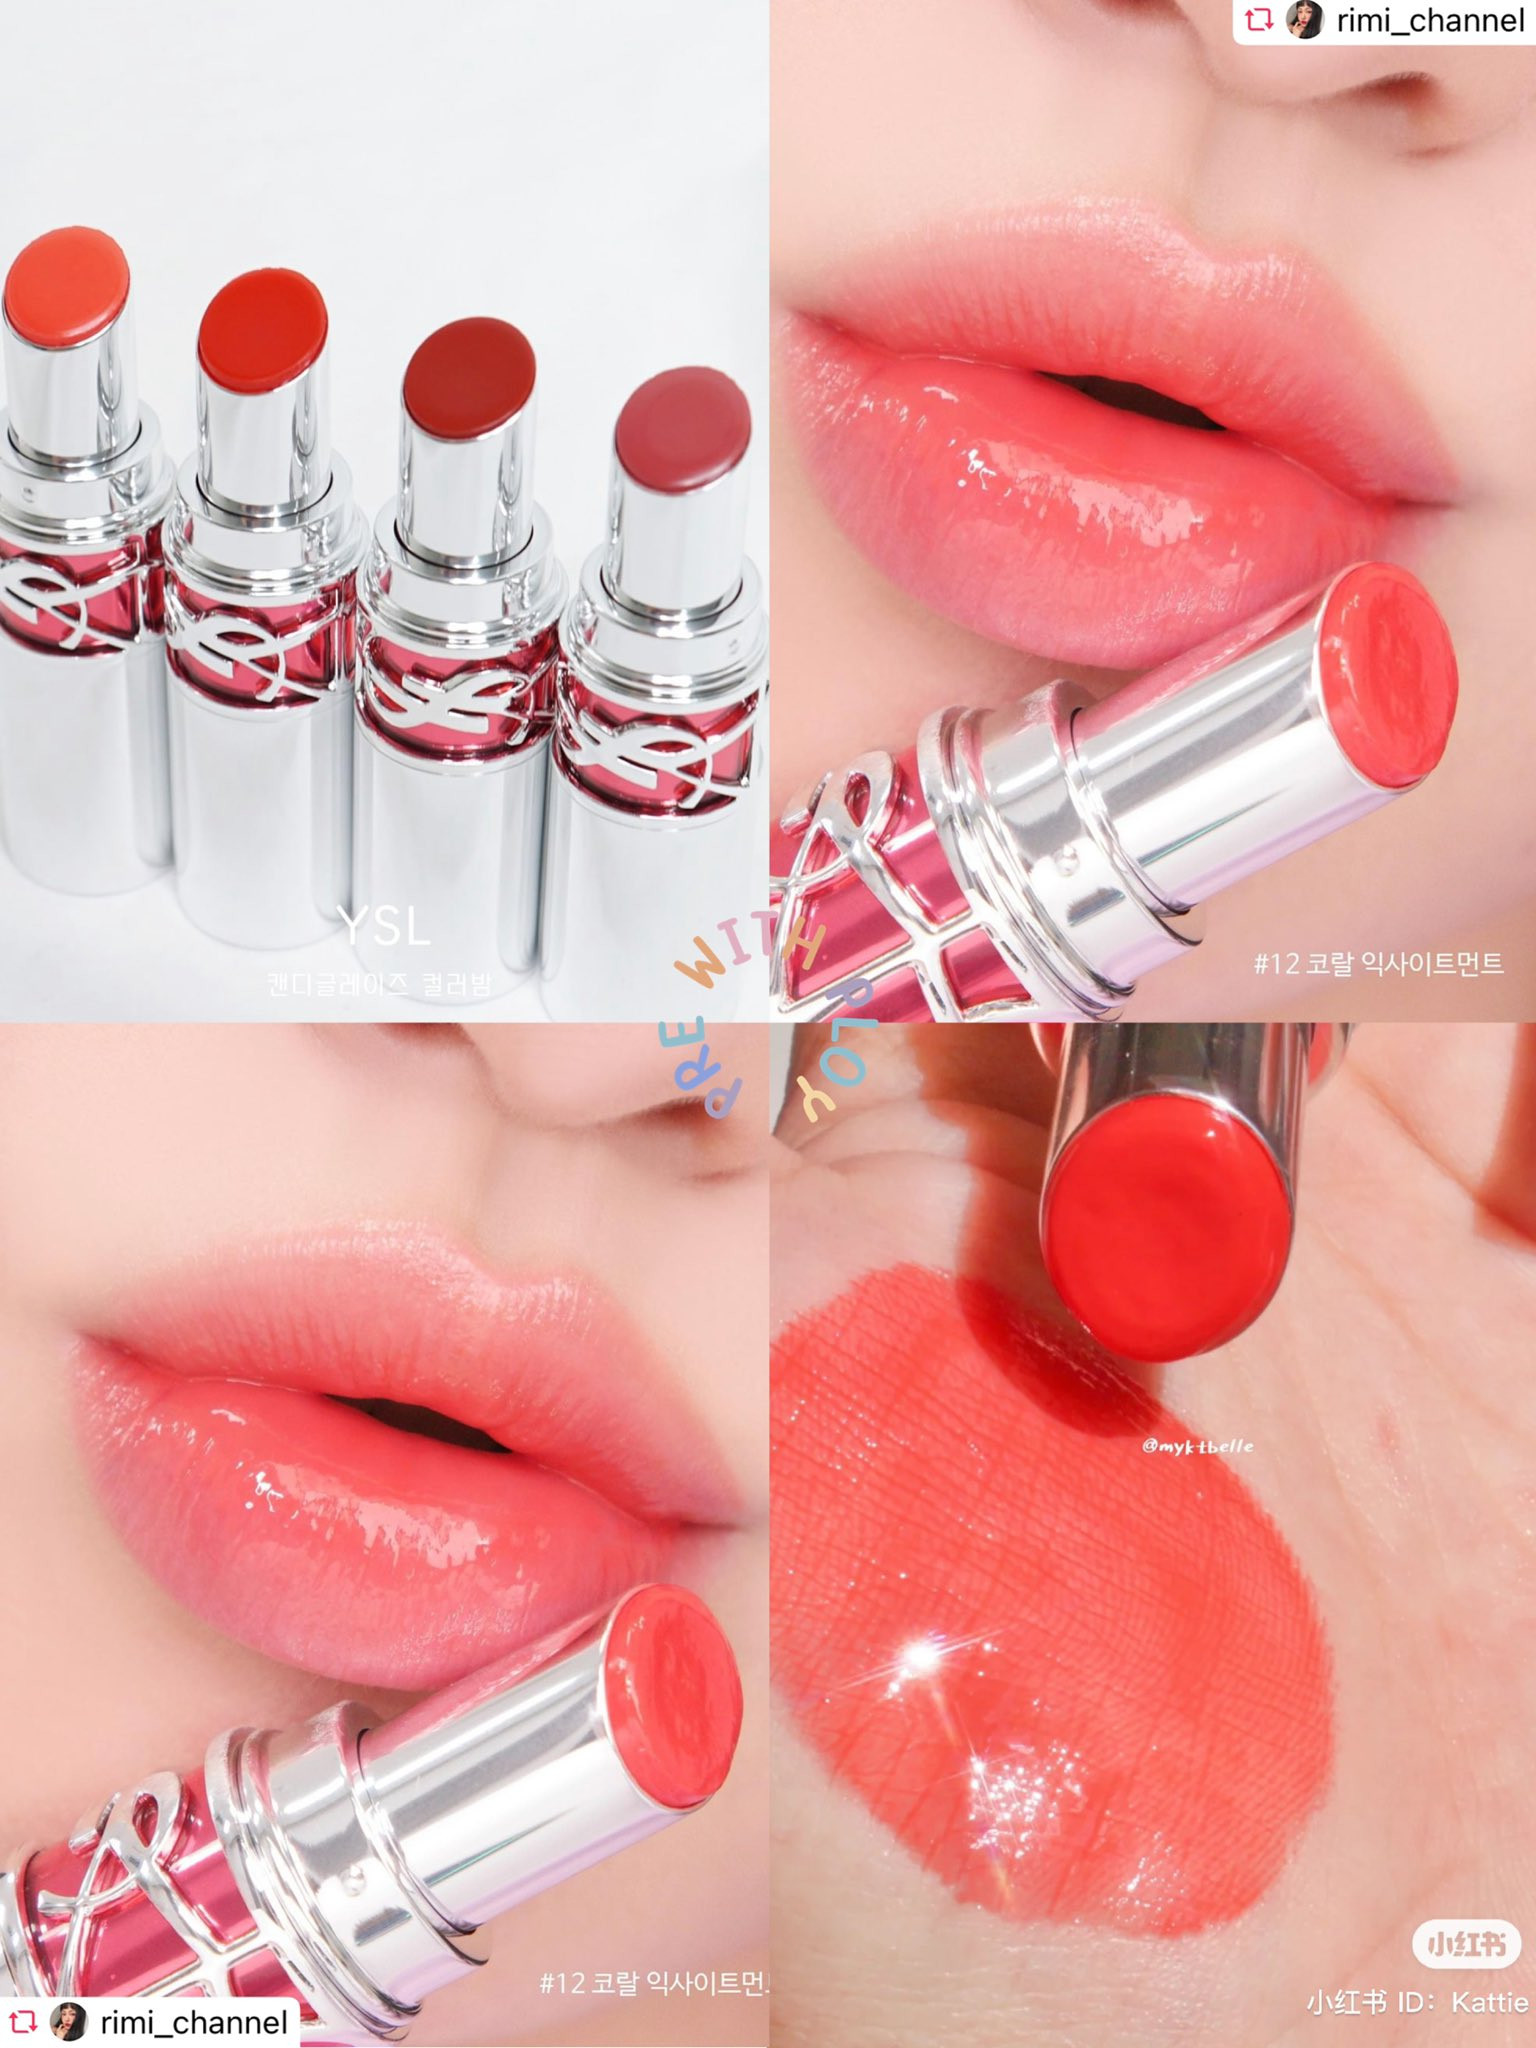 Son YSL Rouge Volupte Candy Glaze 12 Coral Excitement